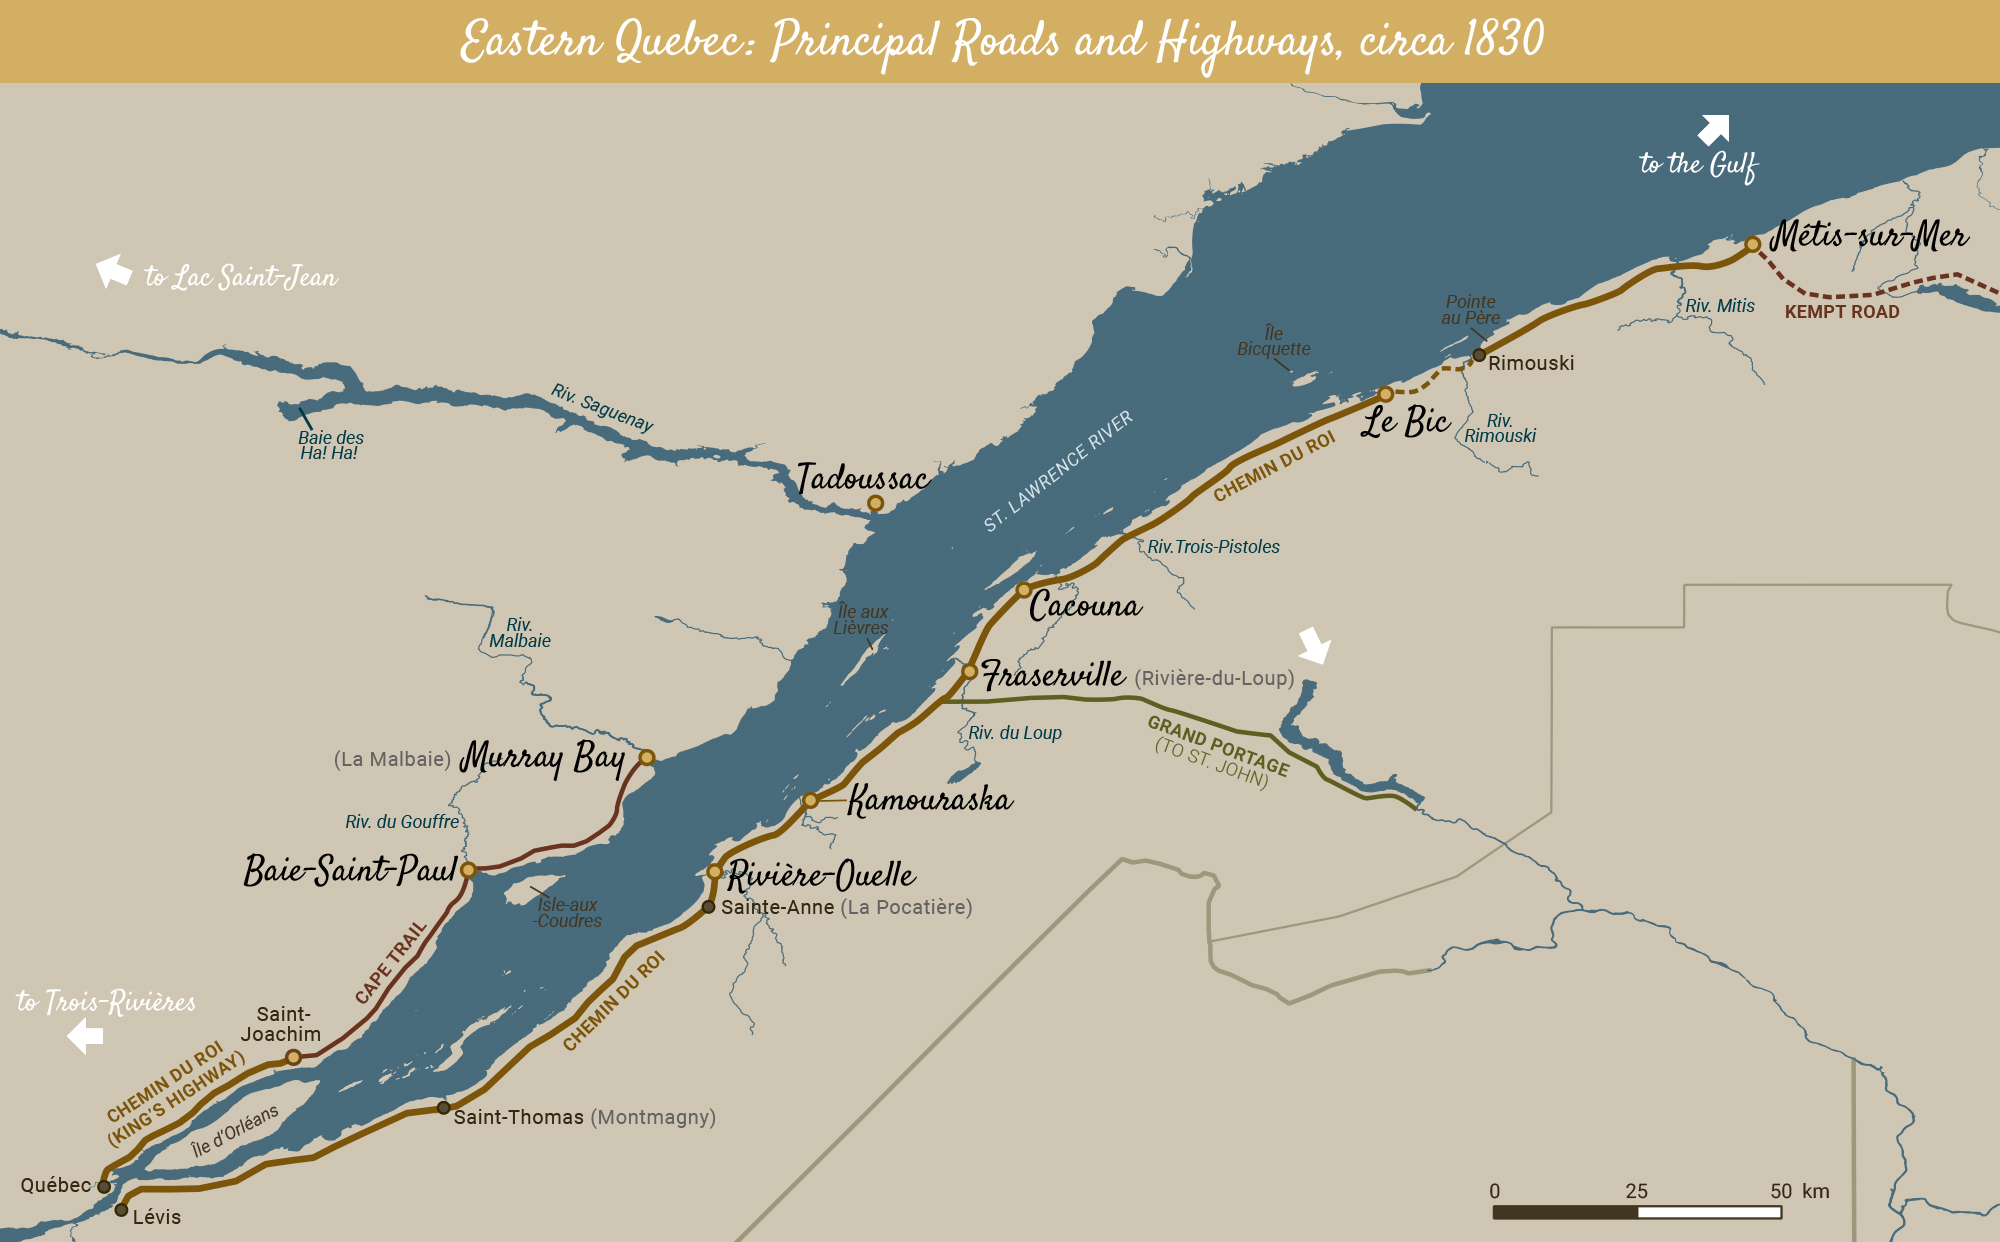 A coloured map of eastern Quebec showing the main roads built around 1830.